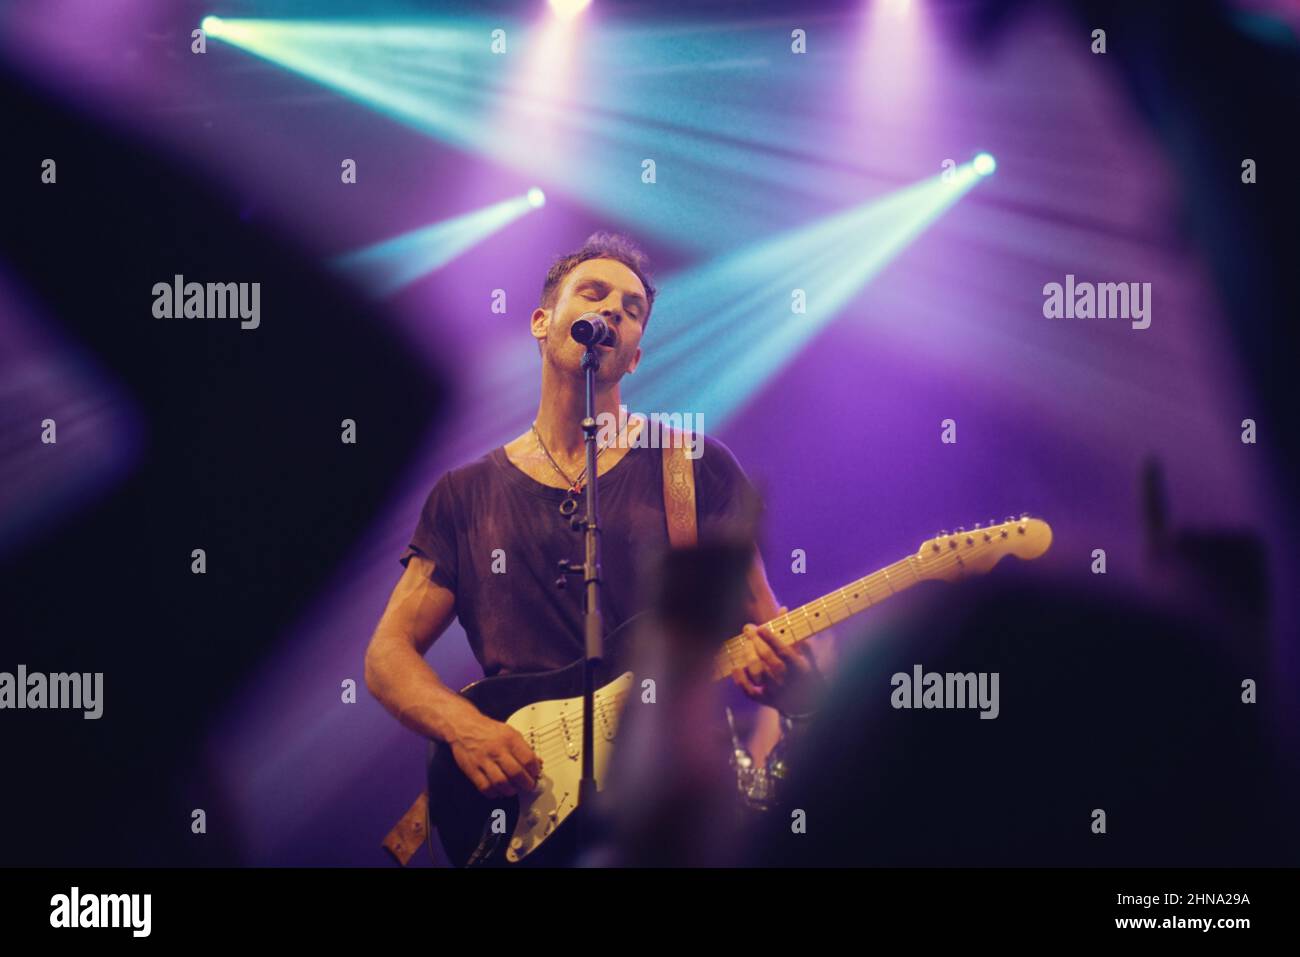 Playing from my soul. Musician playing guitar and singing at a gig. Stock Photo